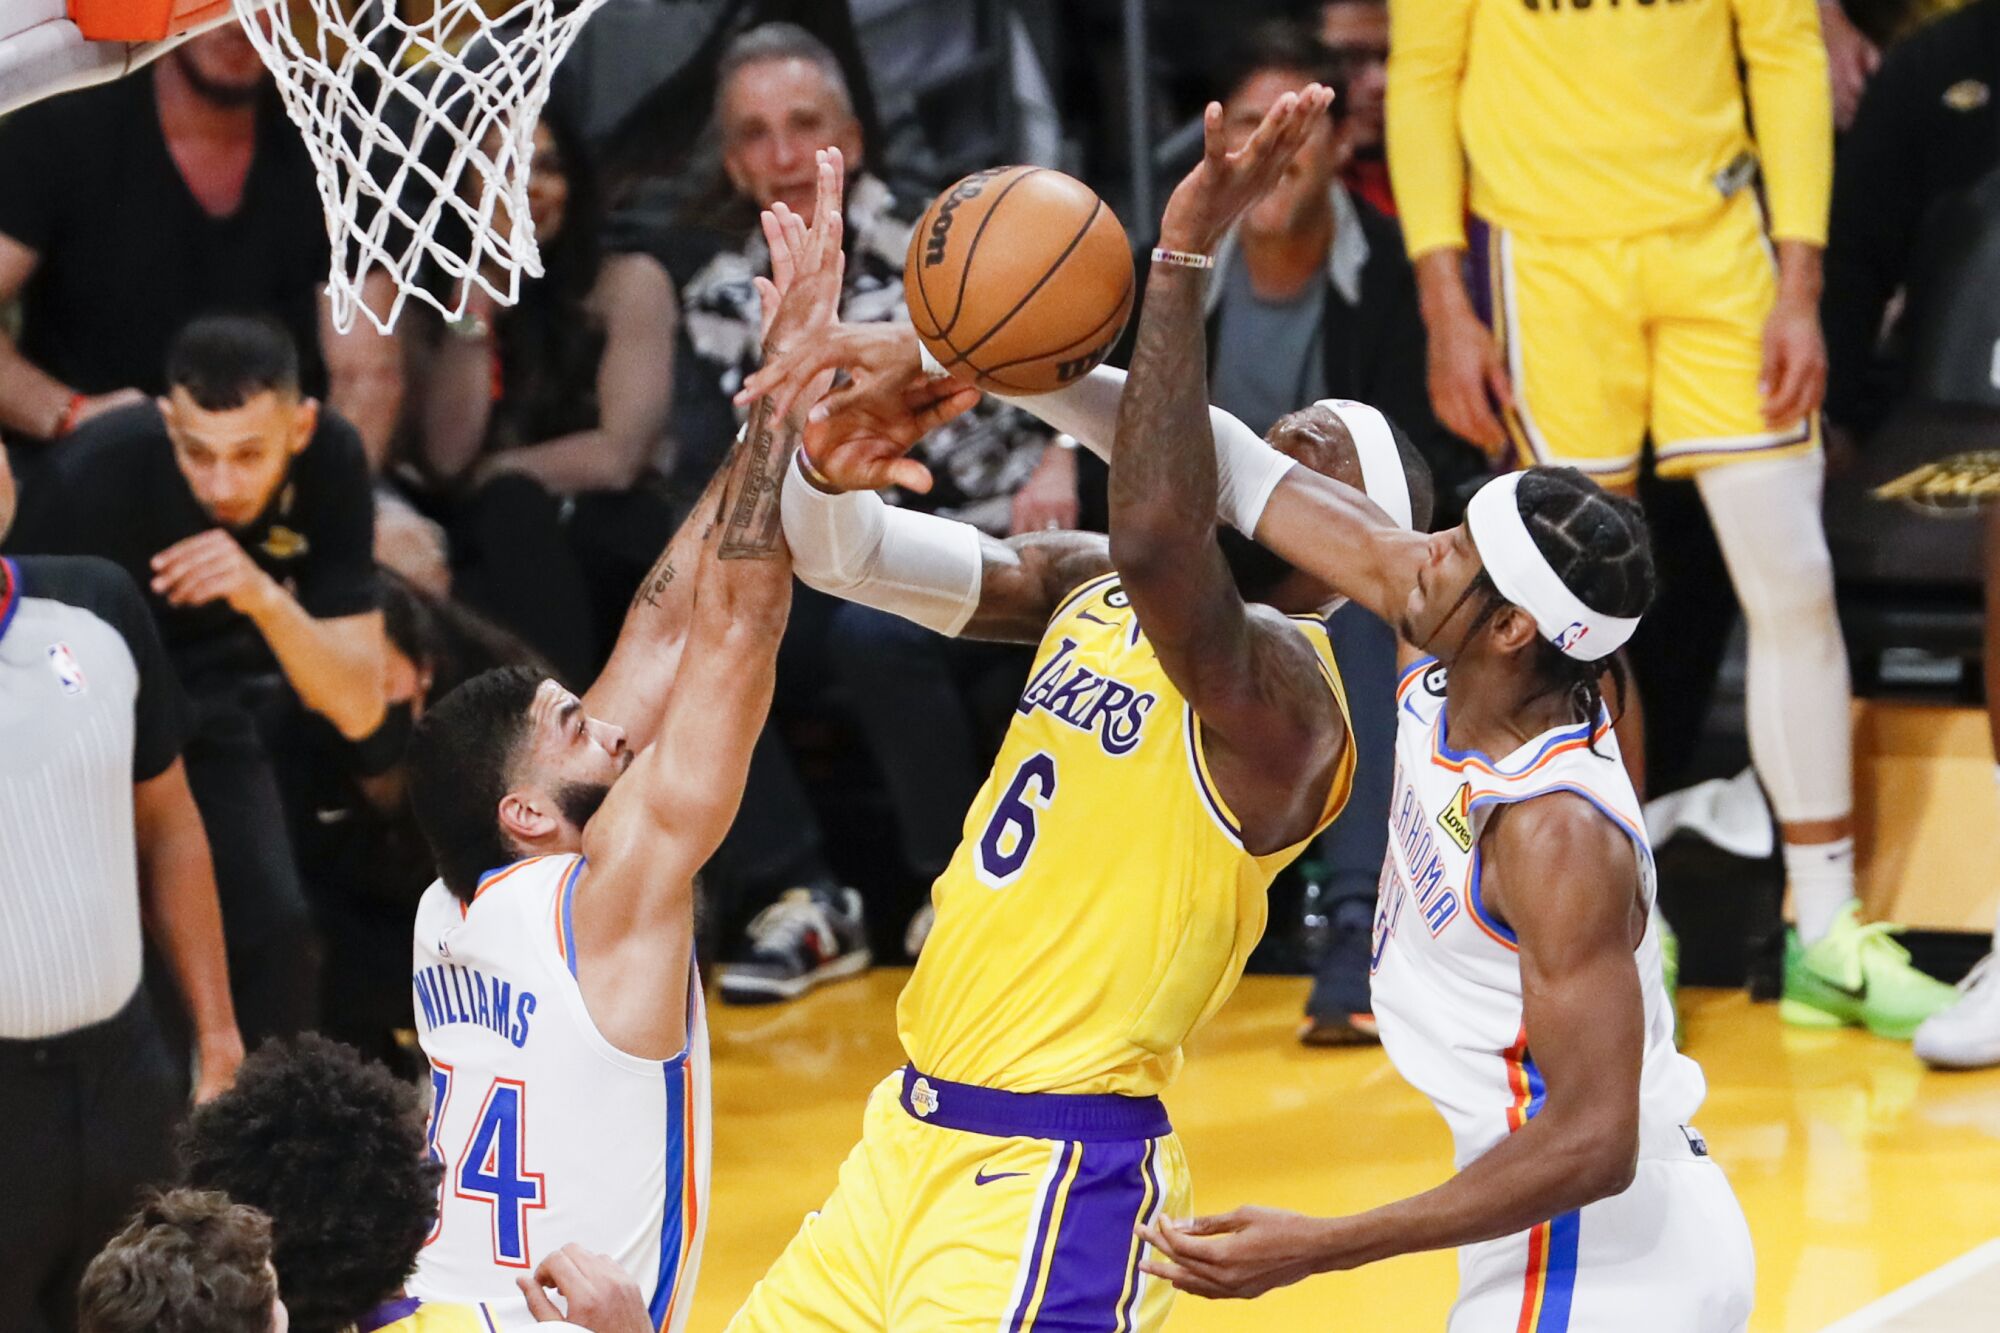 Lakers forward LeBron James goes up for a shot while fouled by Thunder guard Shai Gilgeous-Alexander.